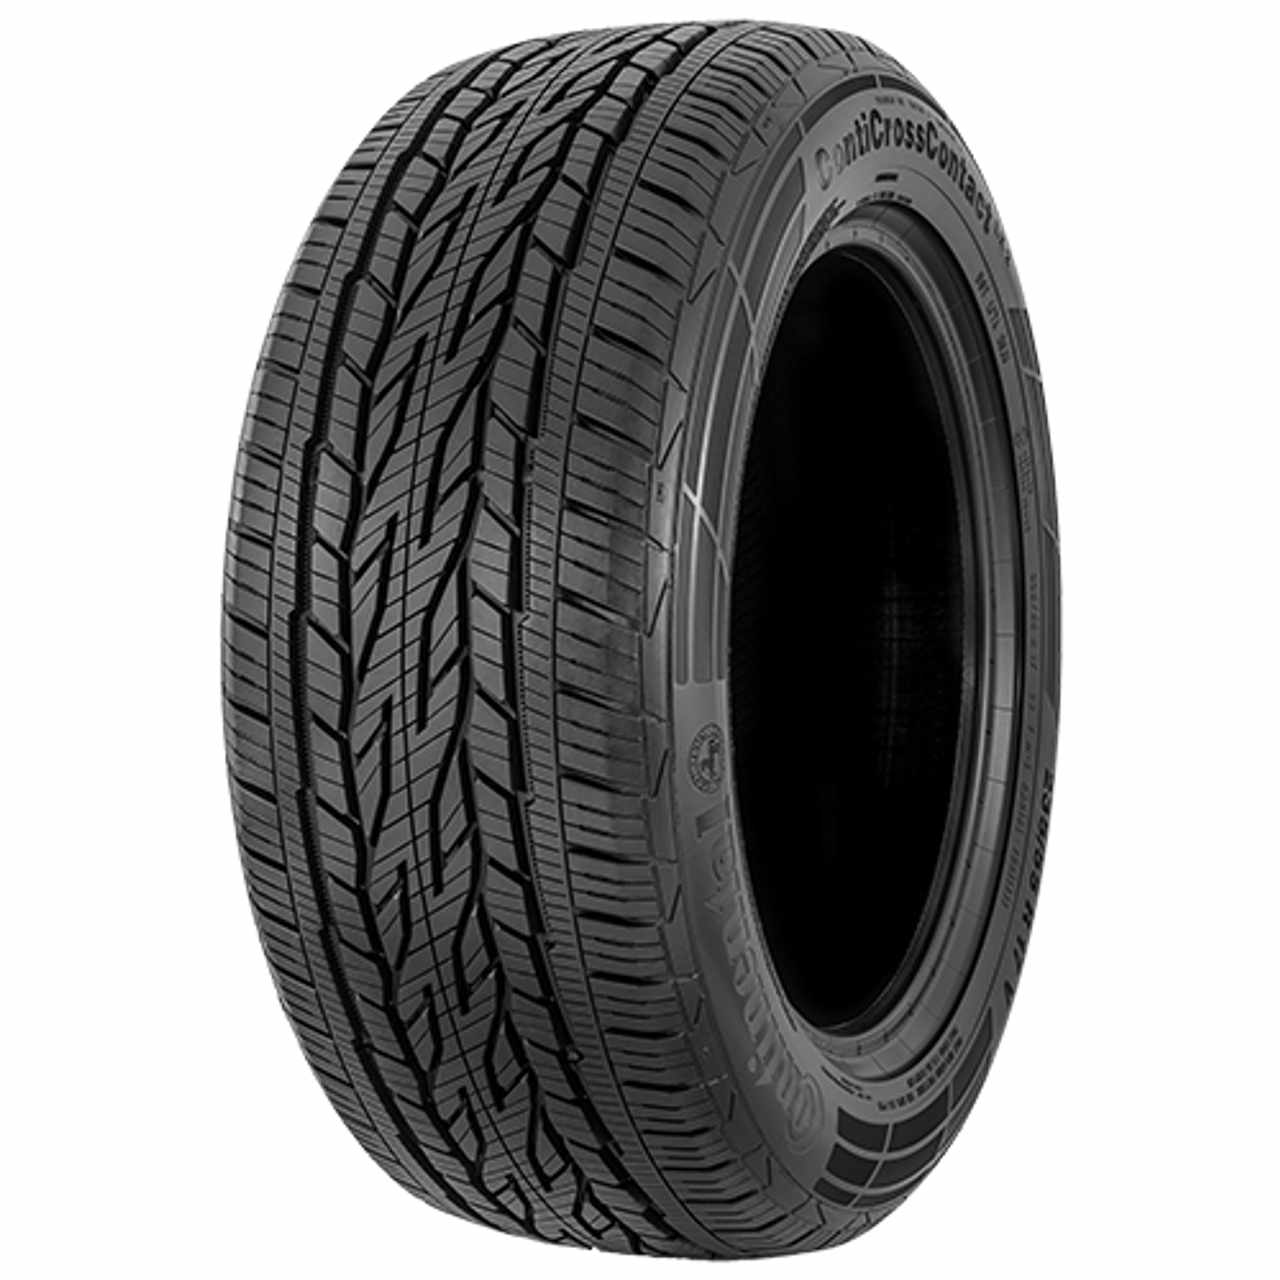 CONTINENTAL CONTICROSSCONTACT LX 2 215/60R17 96H FR BSW